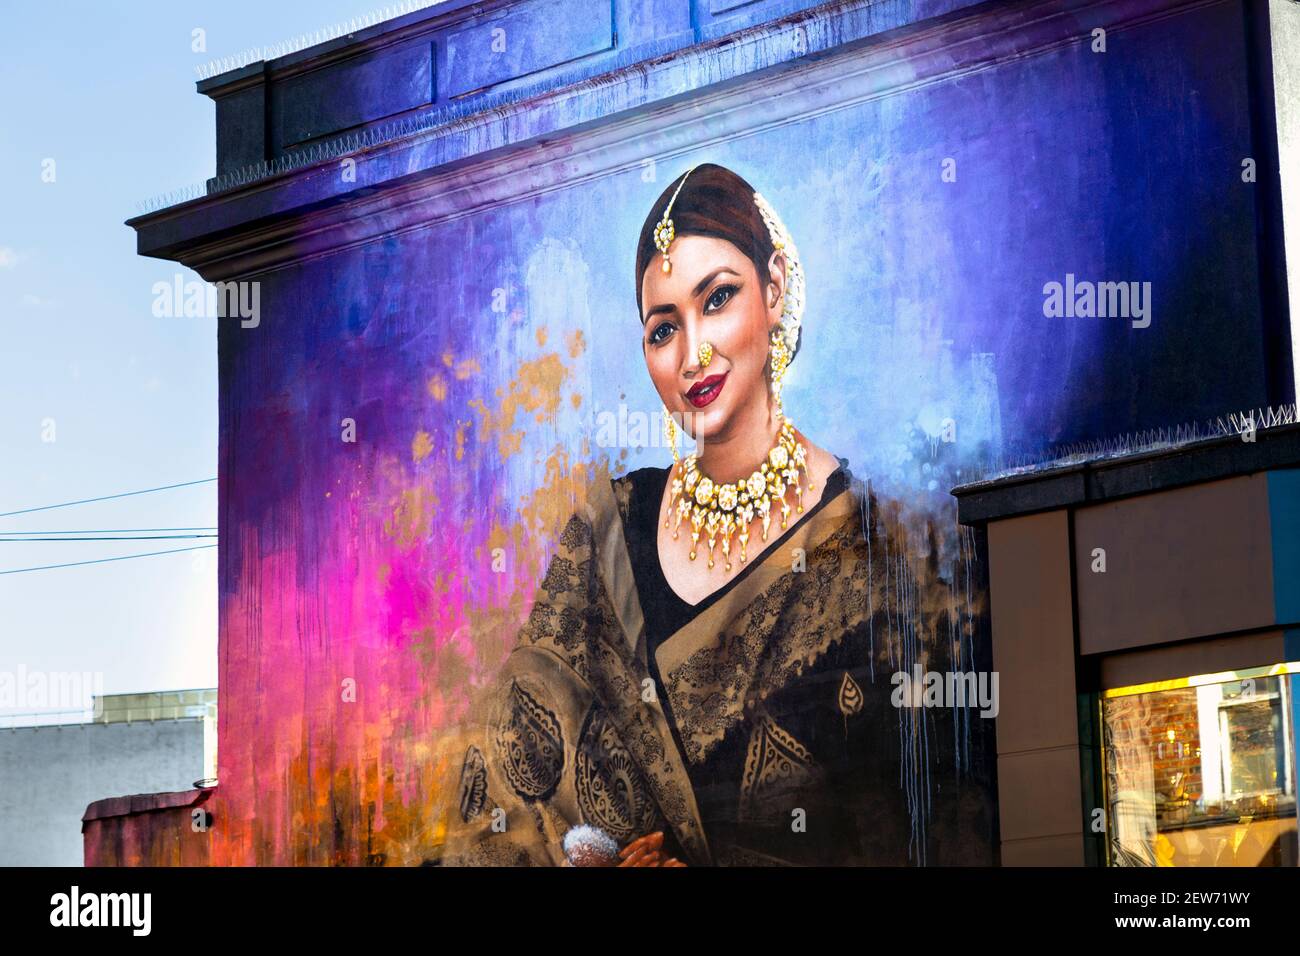 Mural of an Indian woman in traditiona; clothing an jewellery in Upton Park, London, UK Stock Photo